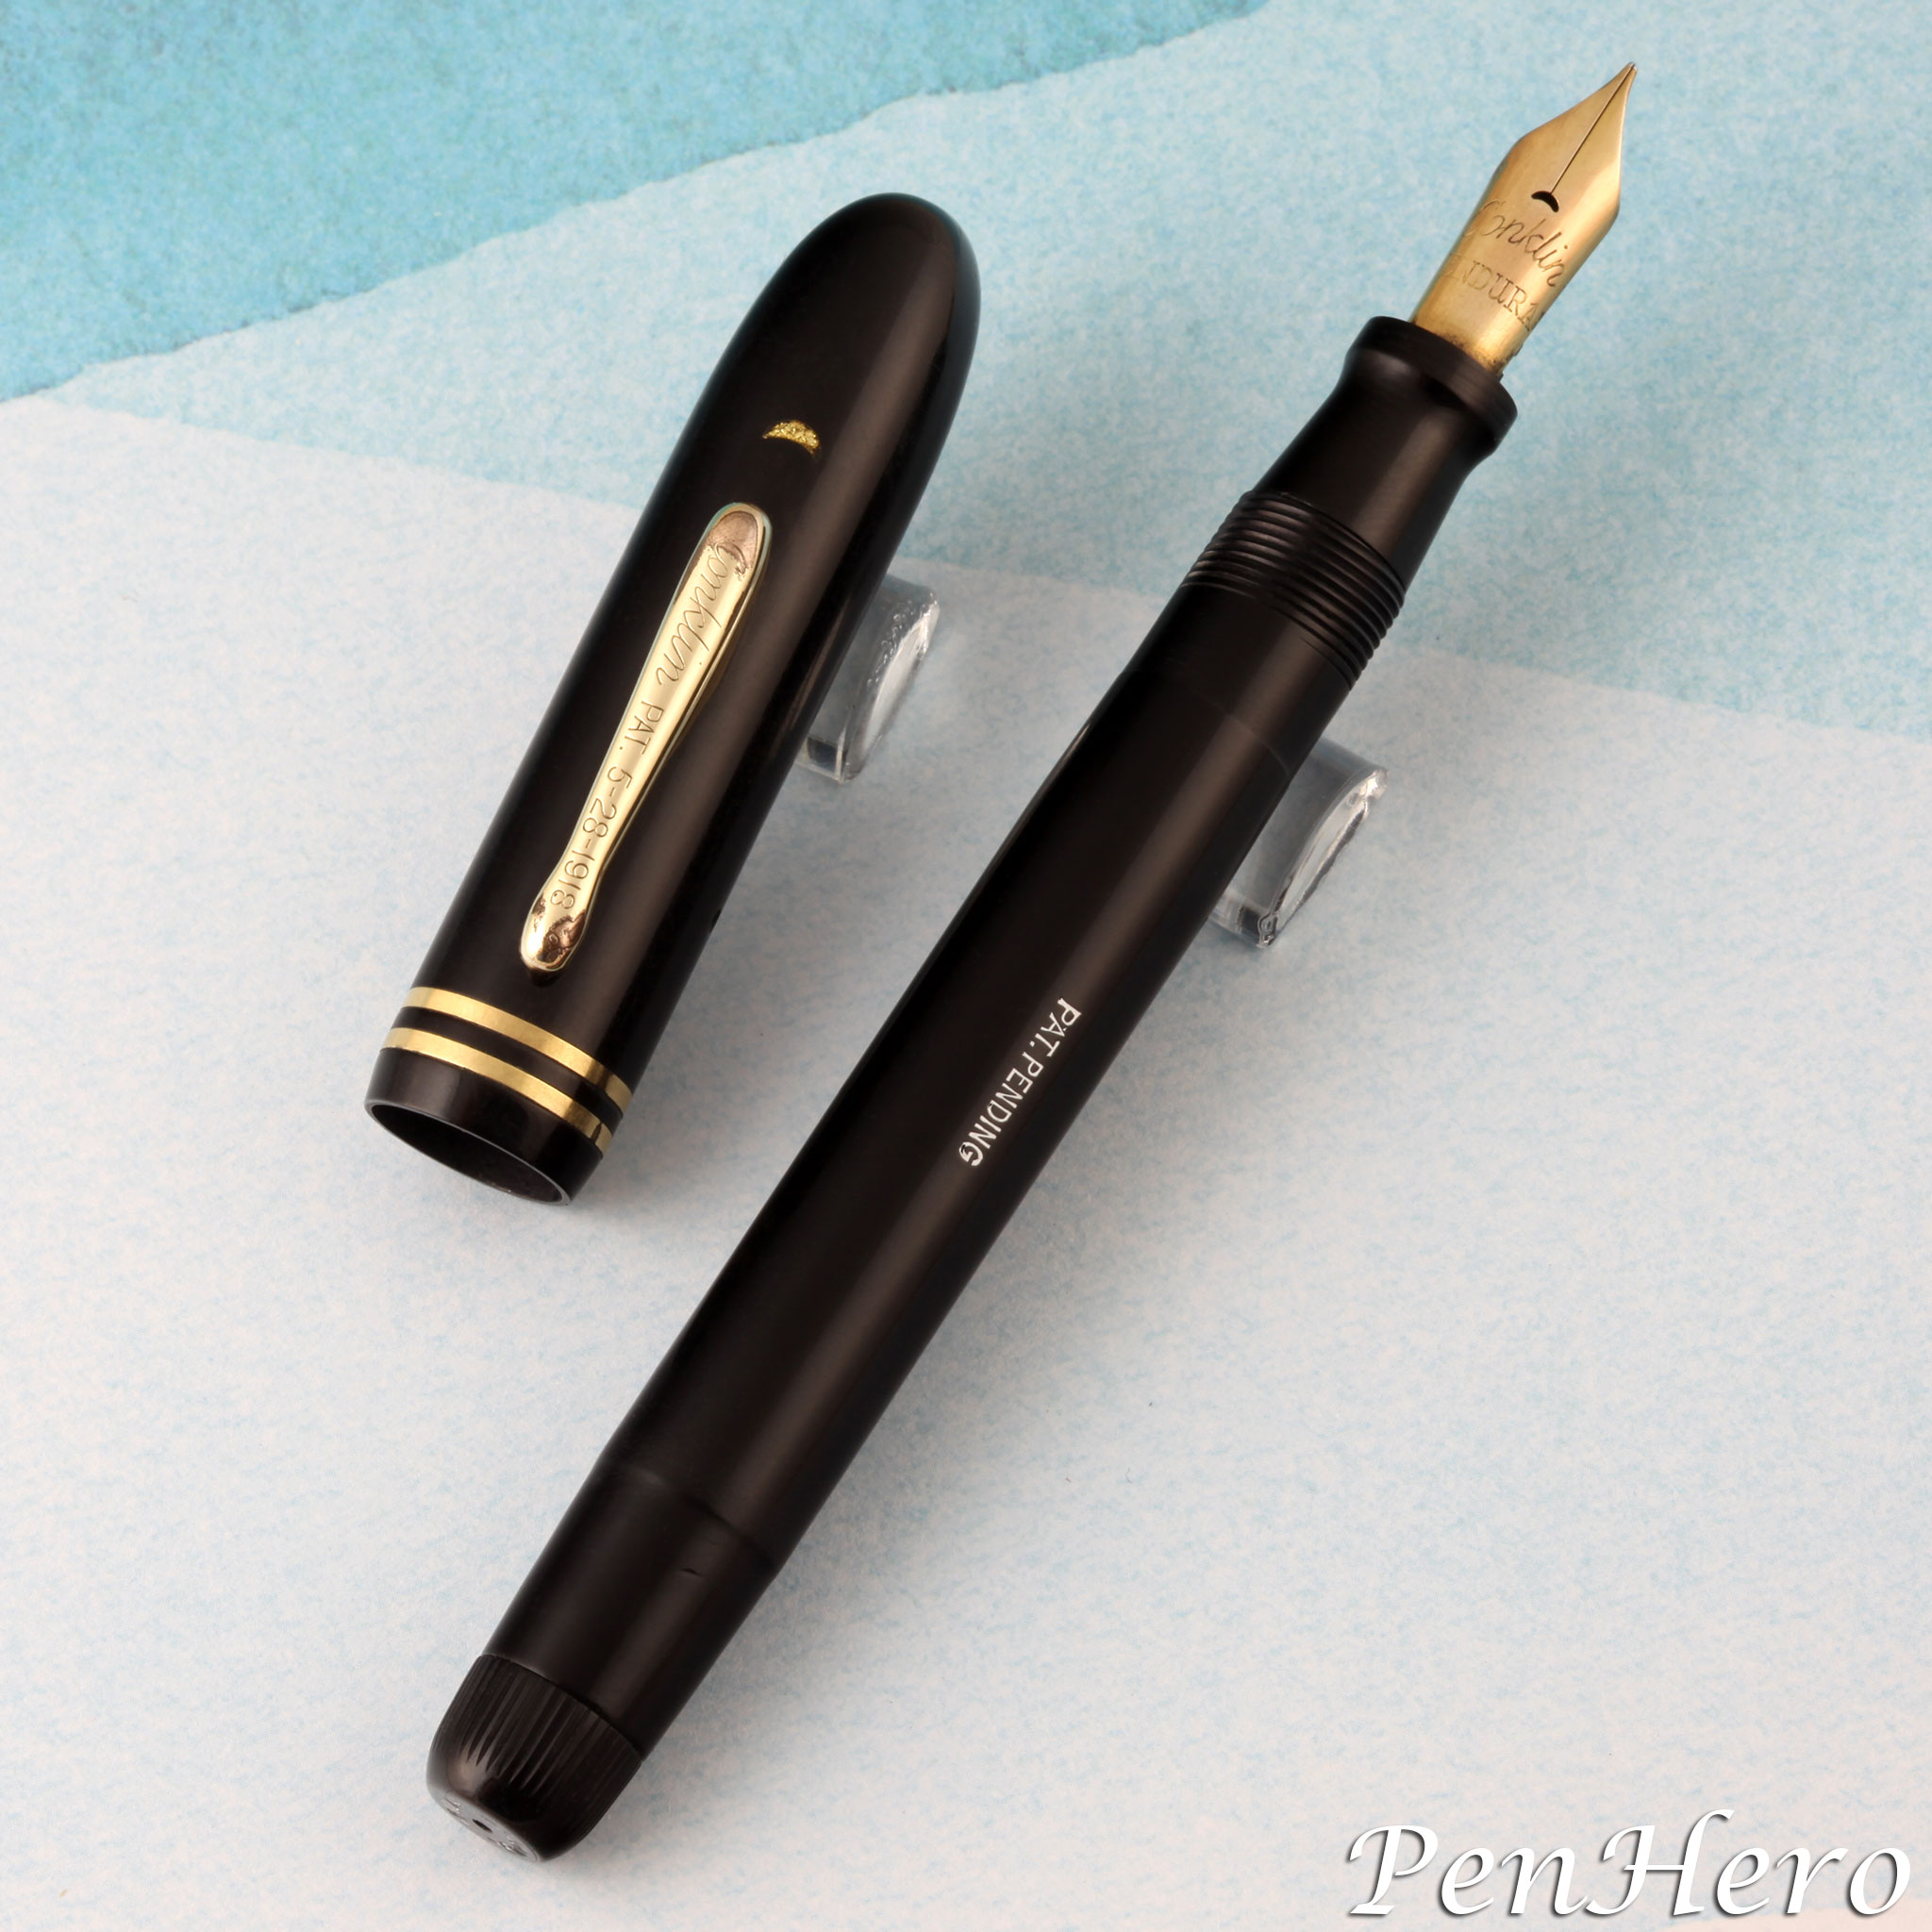 Antique Park Row Fountain Pen 14k Gold Tip Flat Top Sub Brand of Eclipse